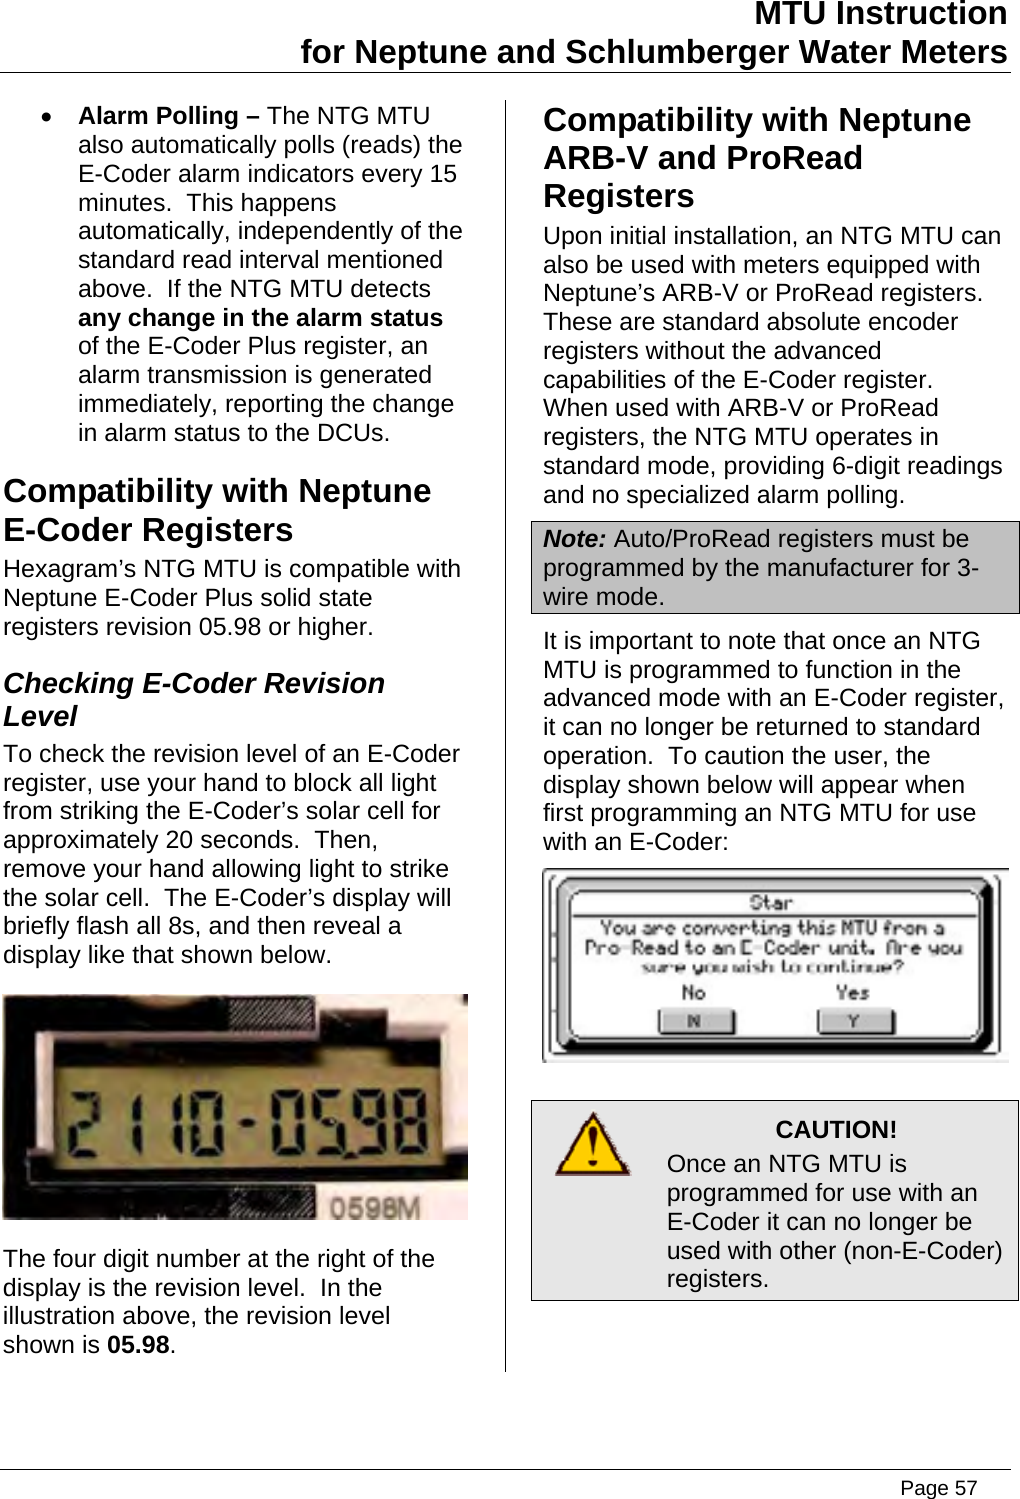 Page 57 of Aclara Technologies 09015 Transmitter for Meter Reading User Manual users manual